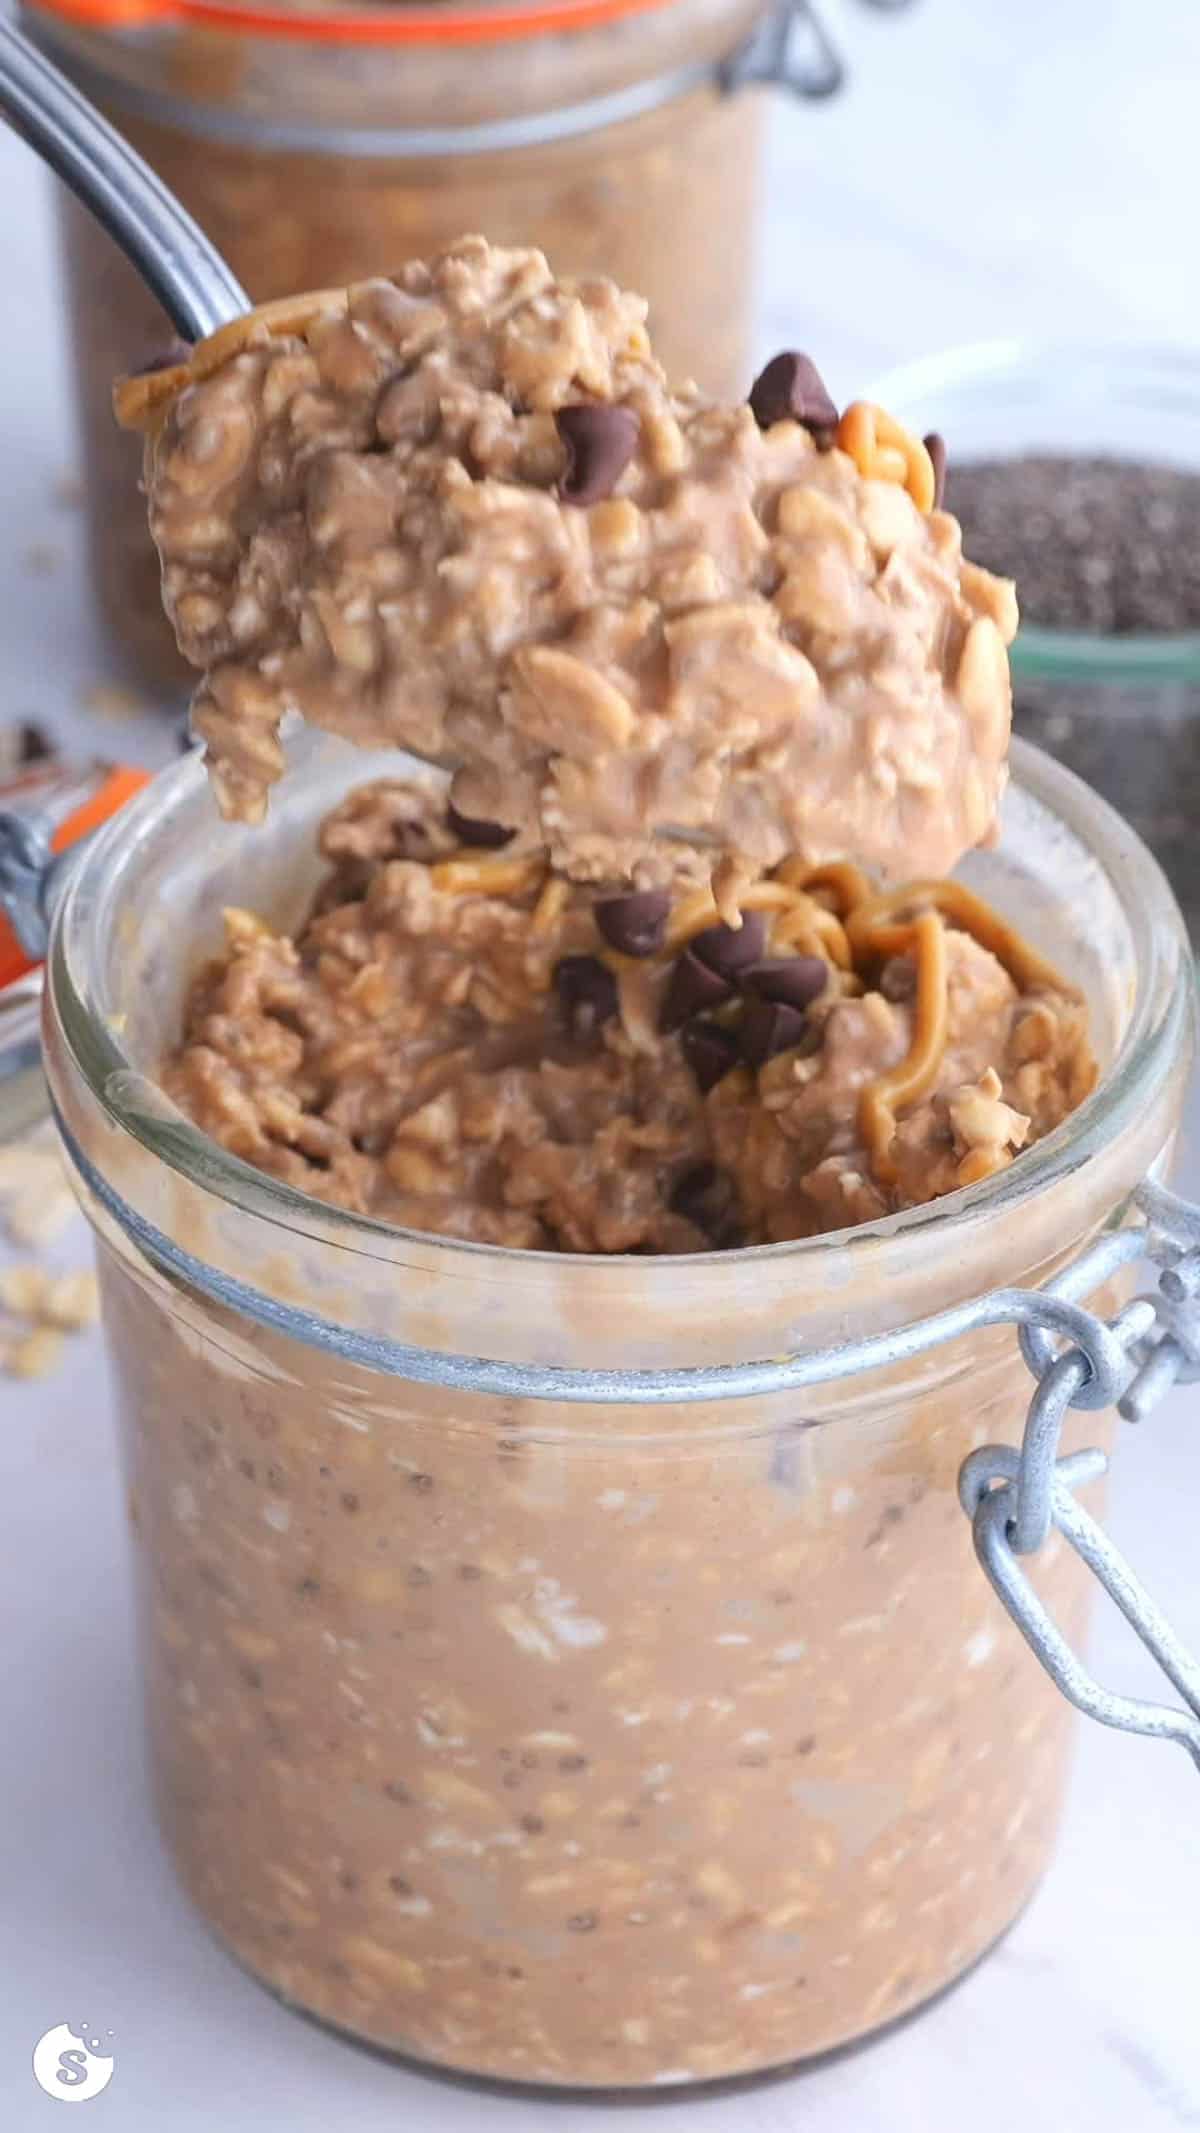 A big spoonful of no bake cookie overnight oats being scooped out of a jar